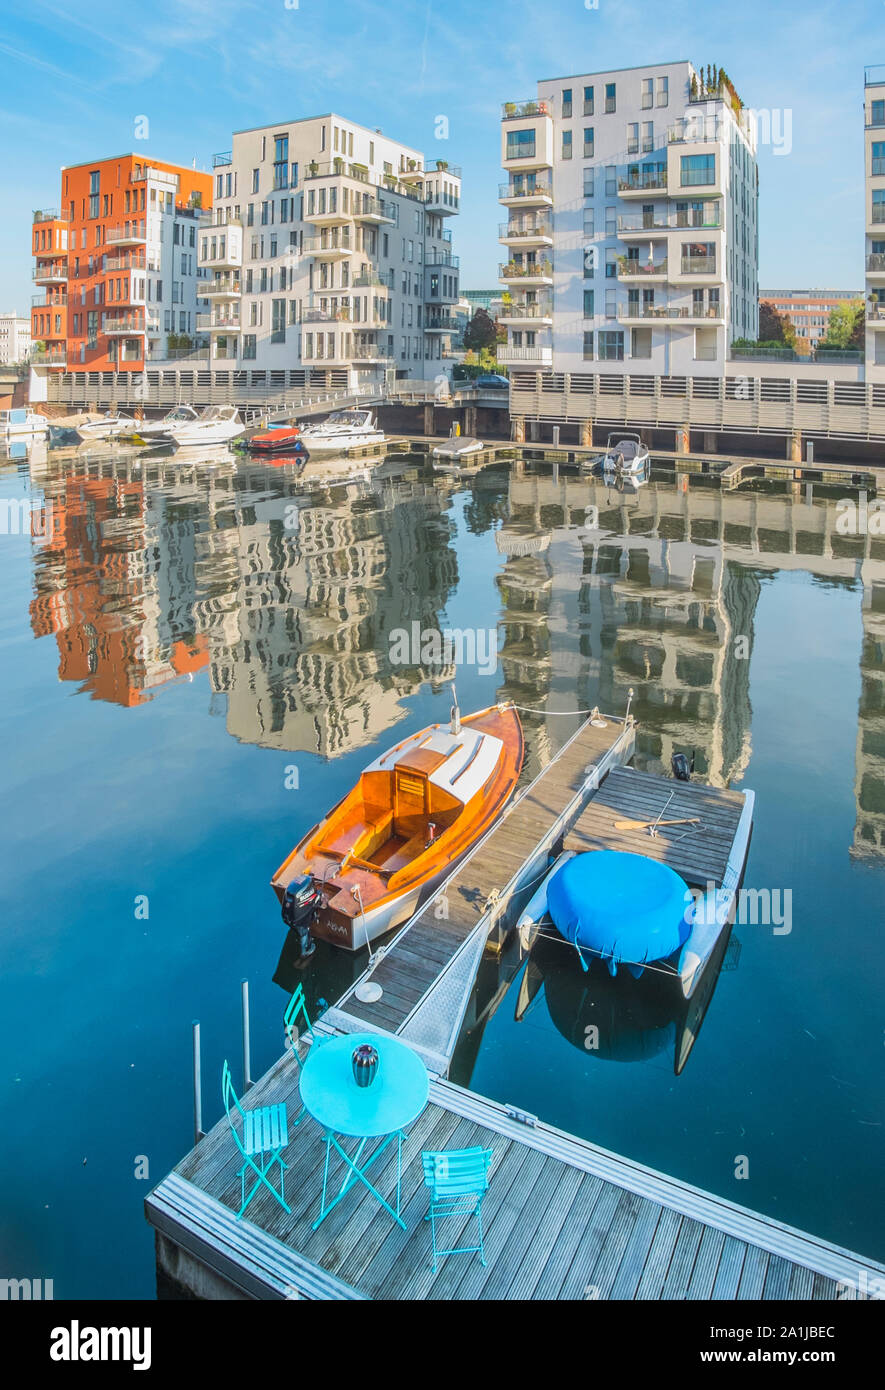 pleasure boats at mooring in westhafen quarter, residential buildings in background Stock Photo